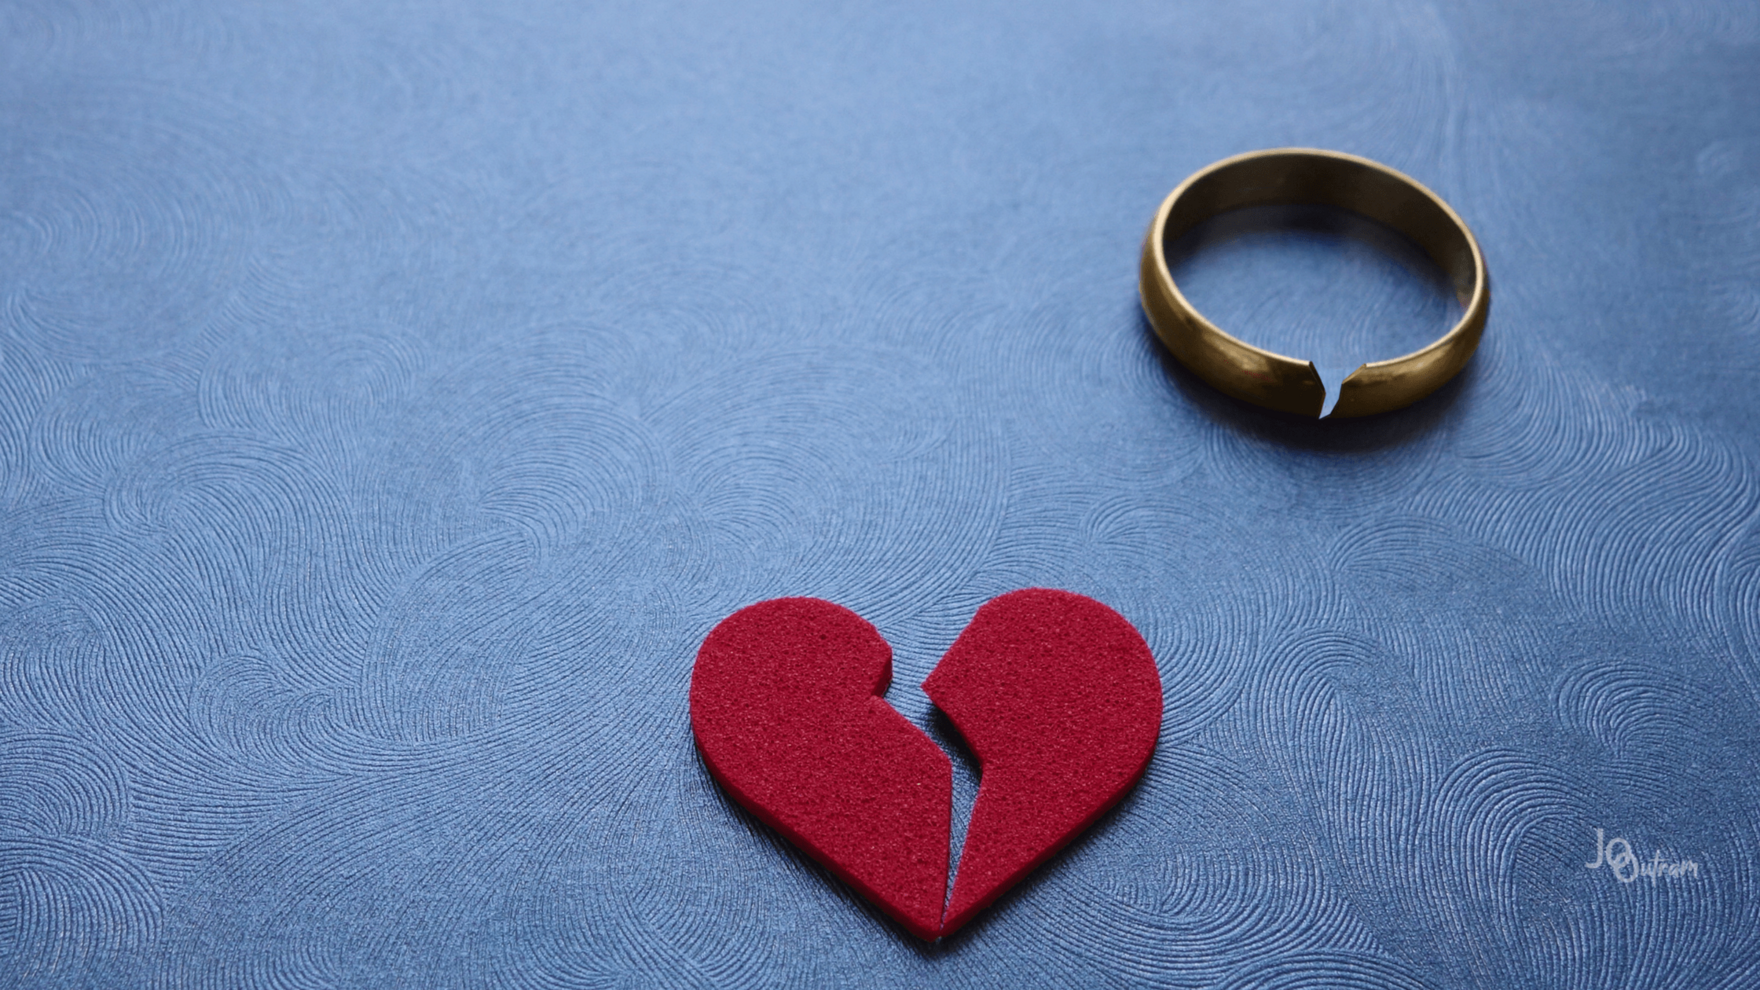 Personal Finance Blog - Money, Marriage and Divorce